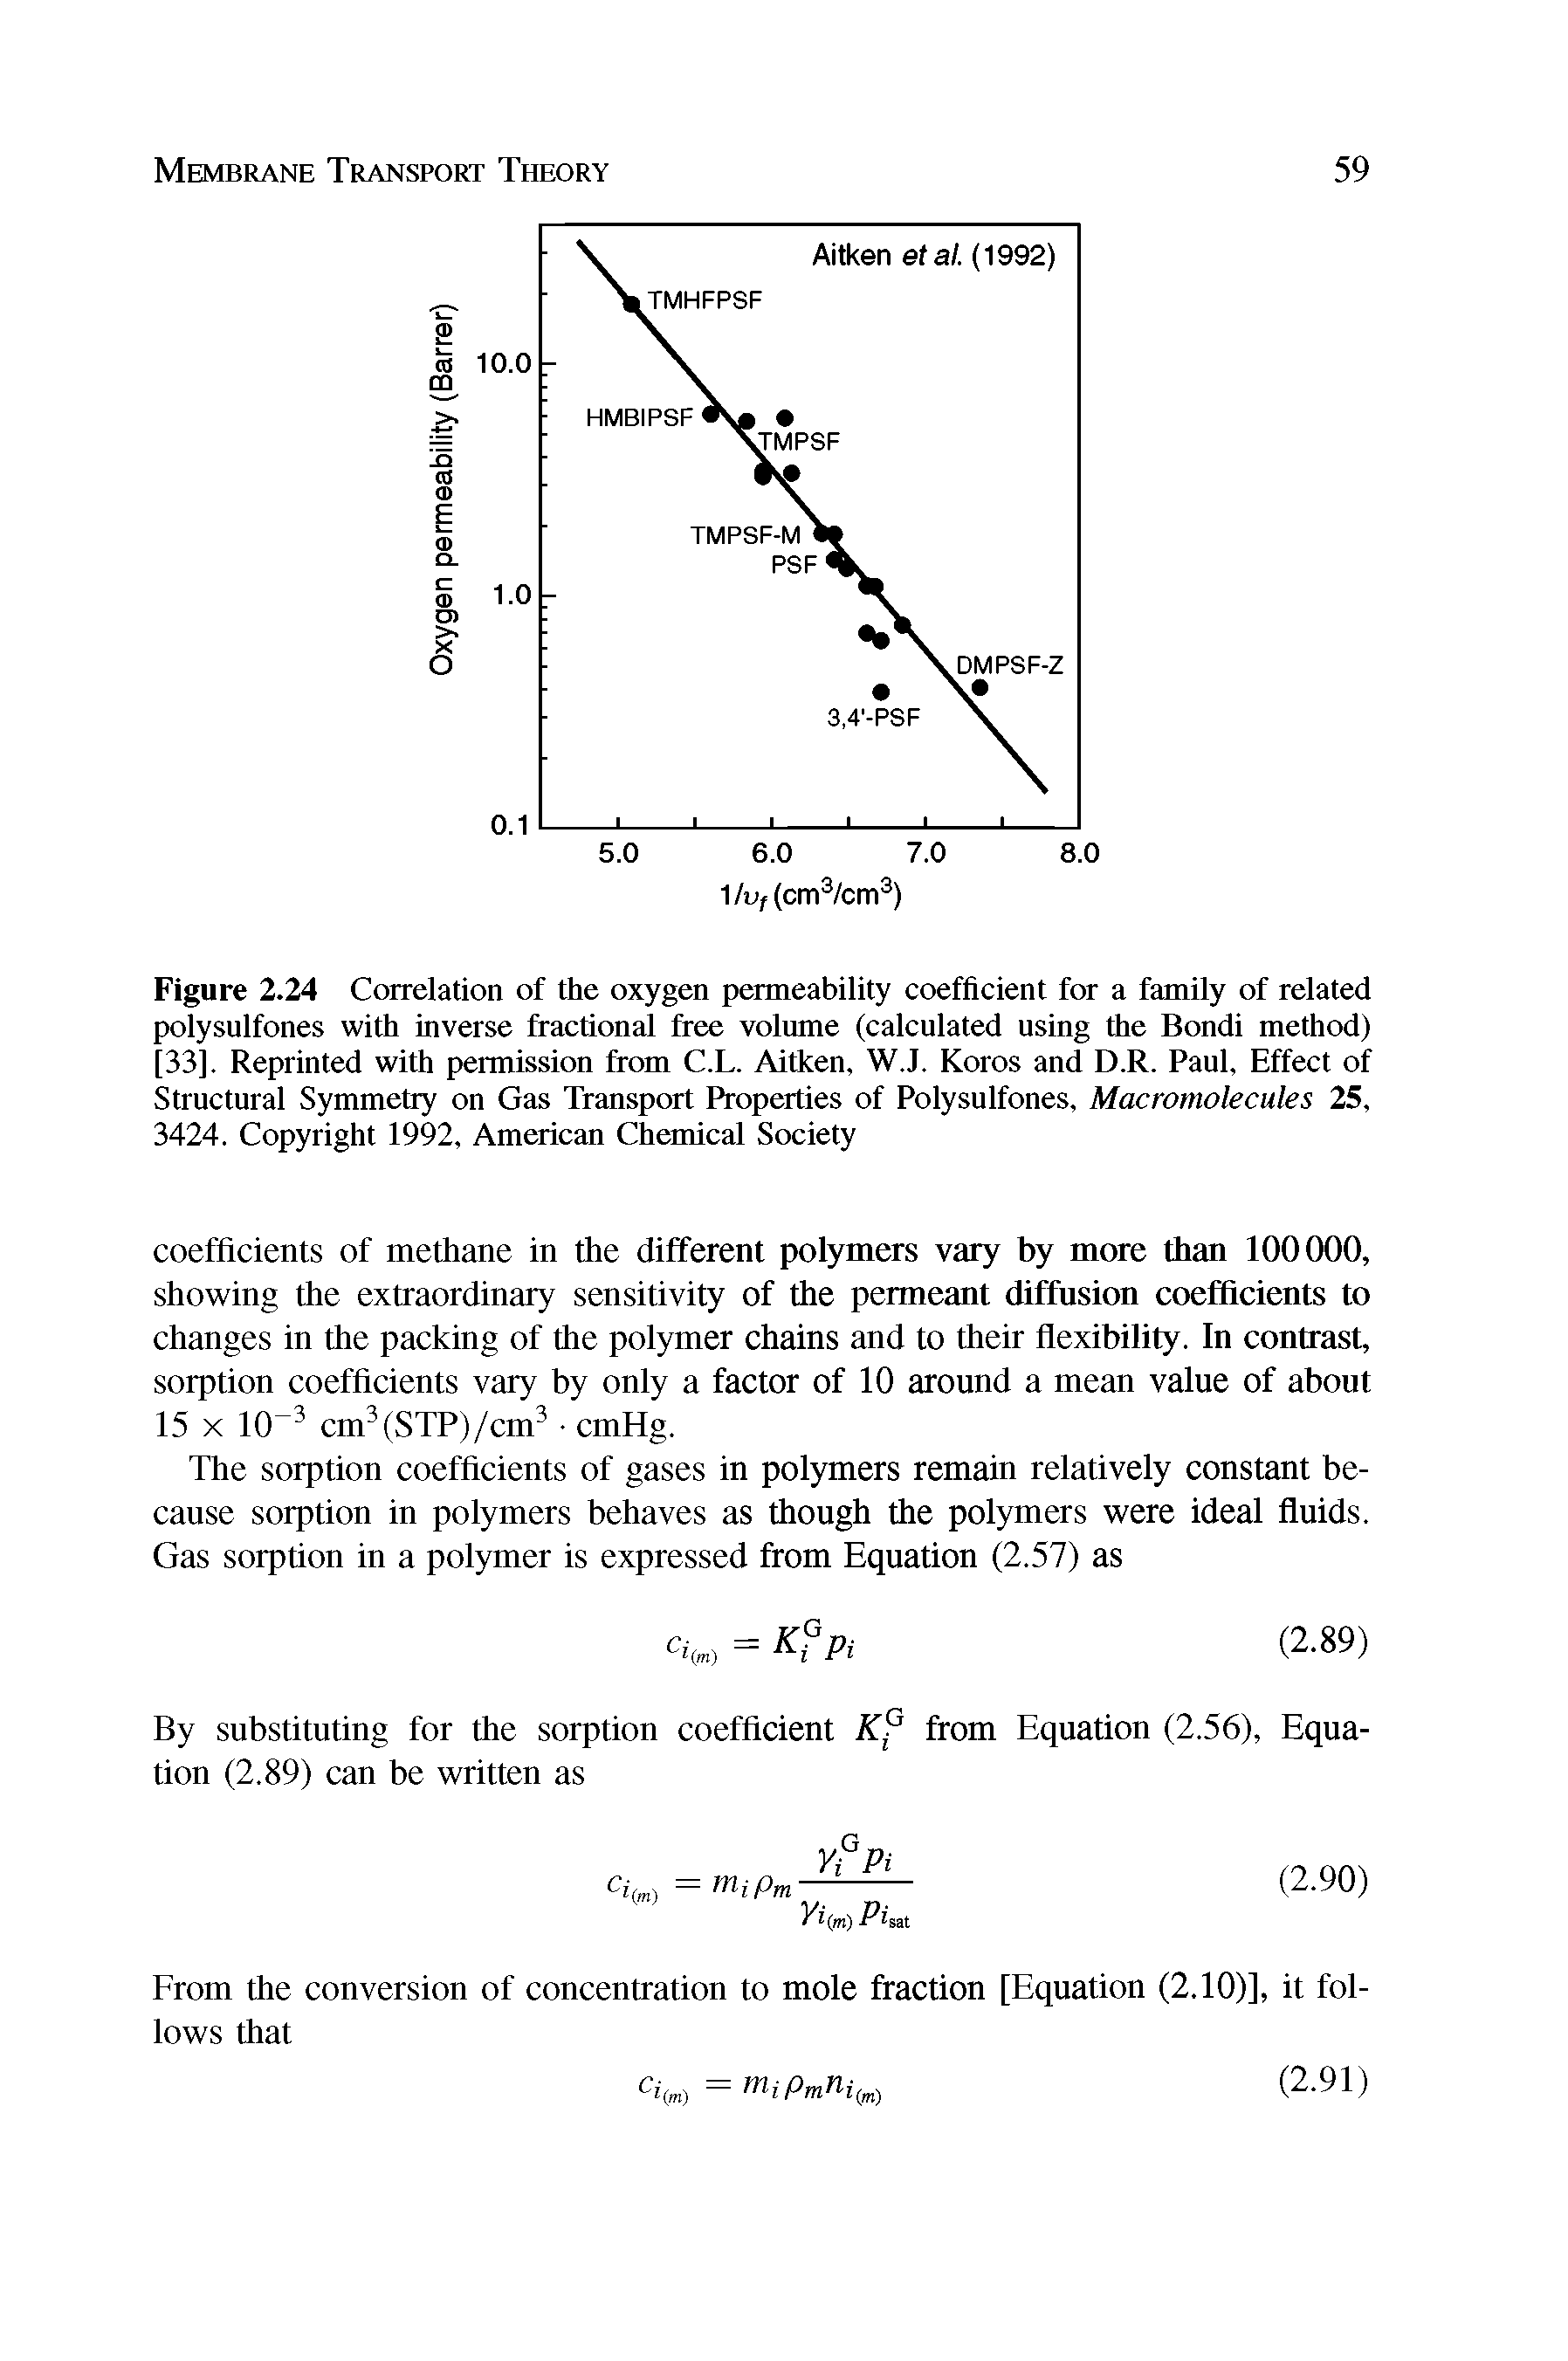 Figure 2.24 Correlation of the oxygen permeability coefficient for a family of related polysulfones with inverse fractional free volume (calculated using the Bondi method) [33]. Reprinted with permission from C.L. Aitken, W.J. Koros and D.R. Paul, Effect of Structural Symmetry on Gas Transport Properties of Polysulfones, Macromolecules 25, 3424. Copyright 1992, American Chemical Society...